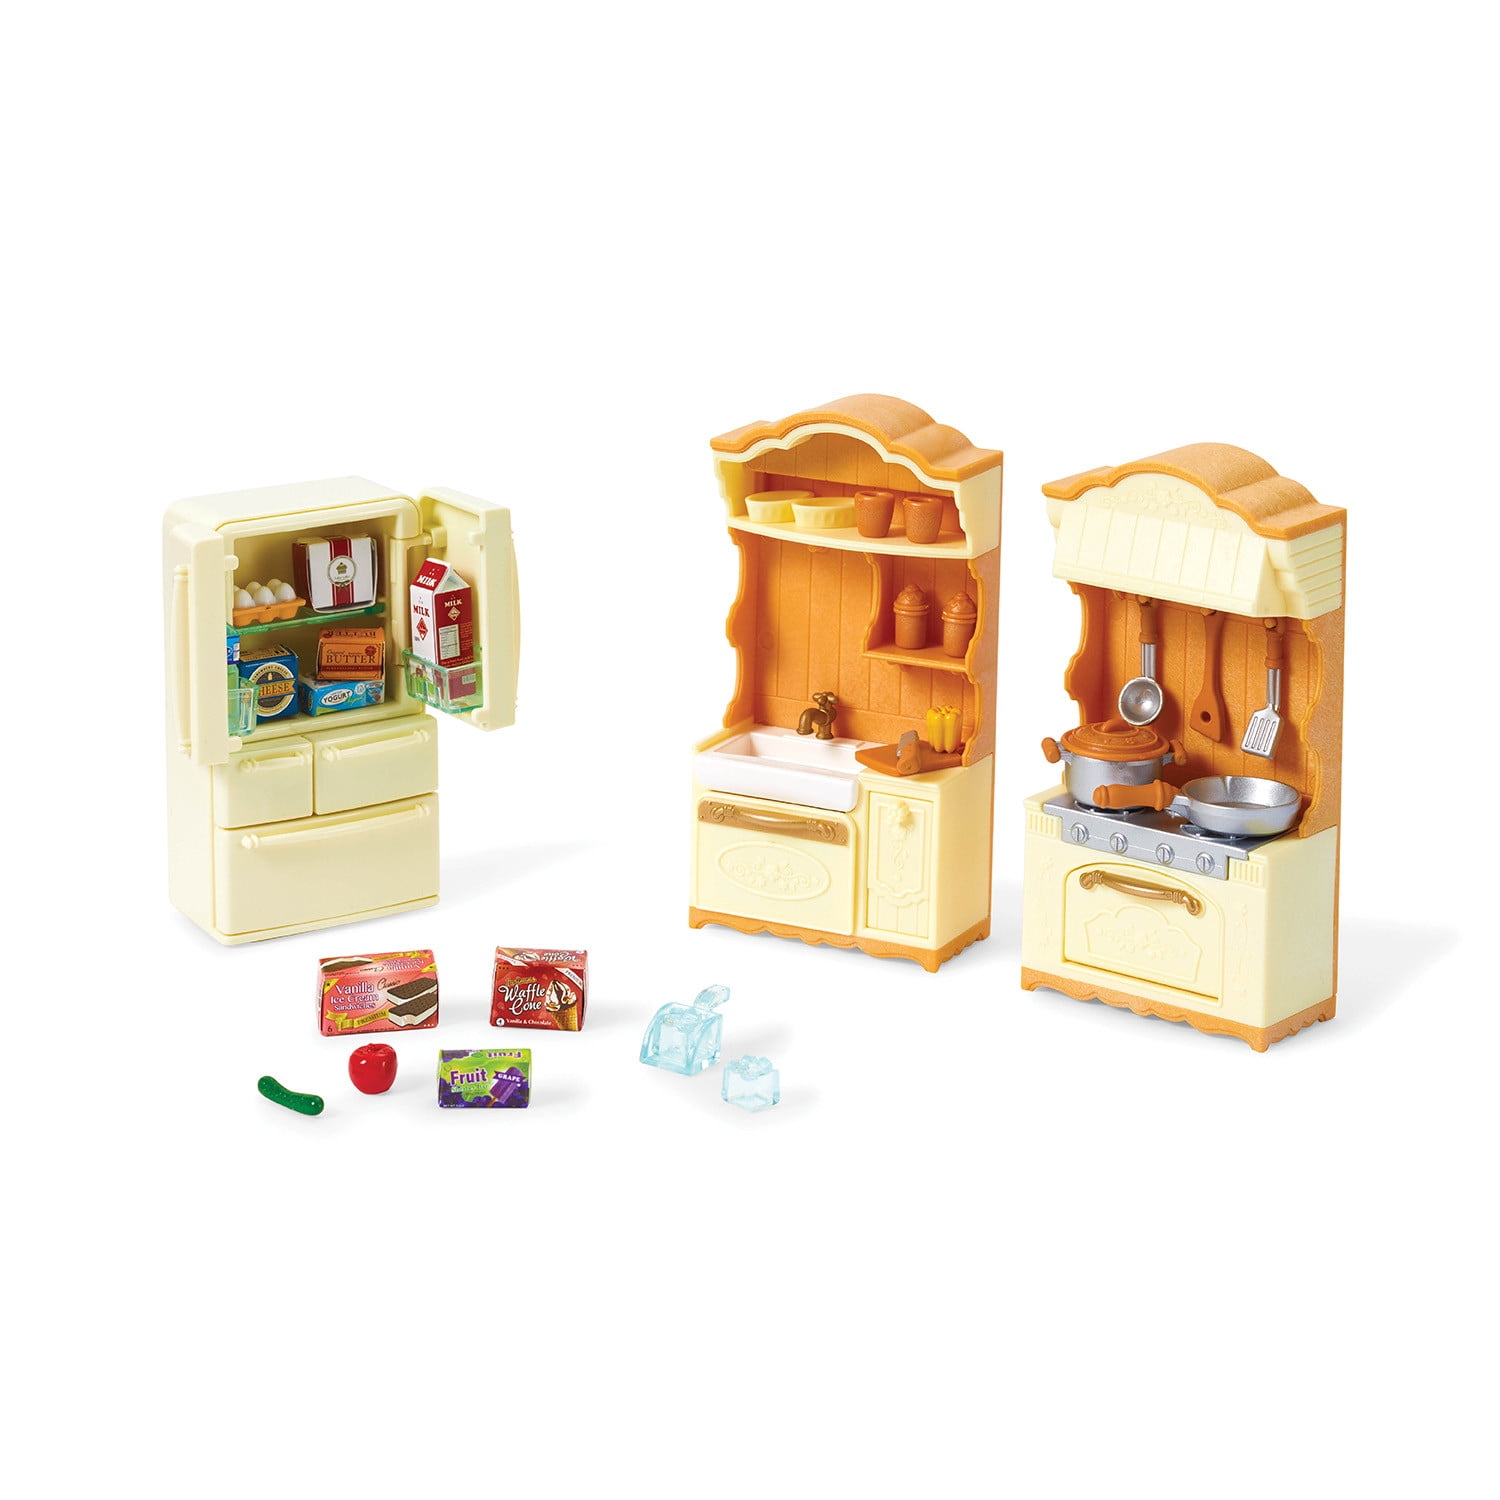 Calico Critters Dollhouse Comfy Living Room Play Set Kids Sofa Table TV Gift New 